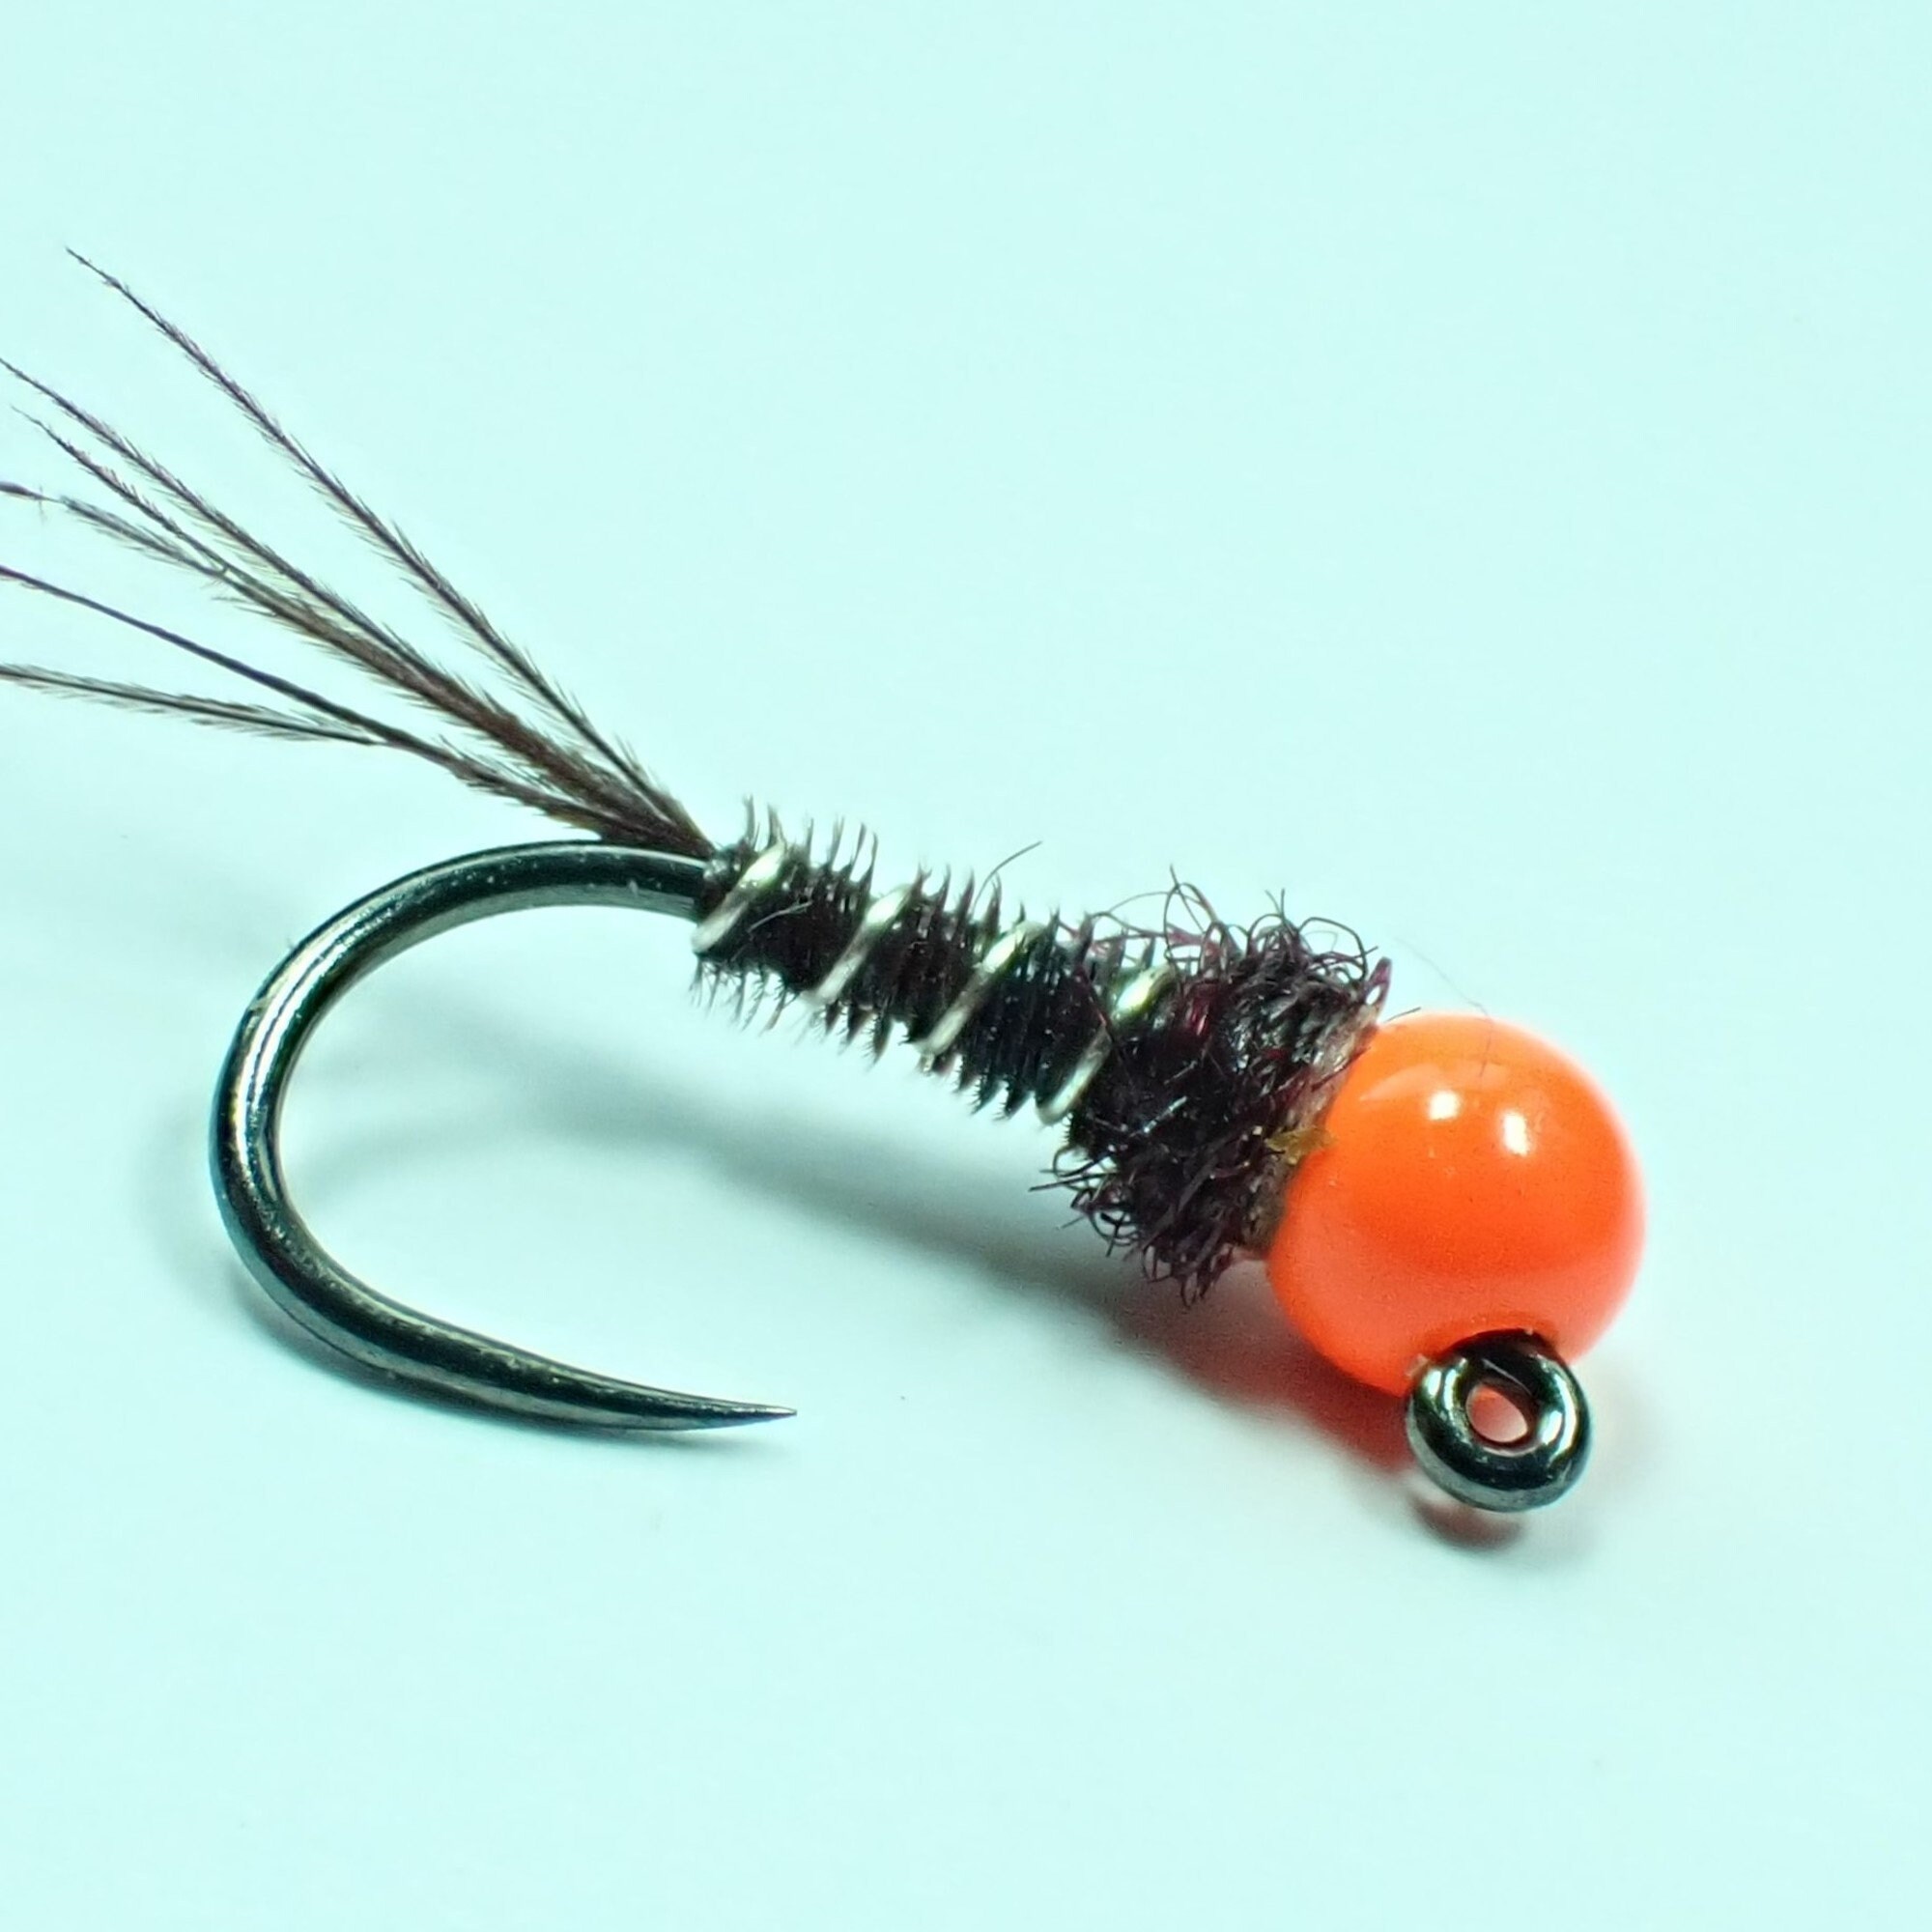 Claret & Orange Hot Head Frenchie, Barbless Tungsten Beaded Pheasant Tail  Euro Nymph Fishing Fly, Tight Line Nymph, Fly Angling Gift. 